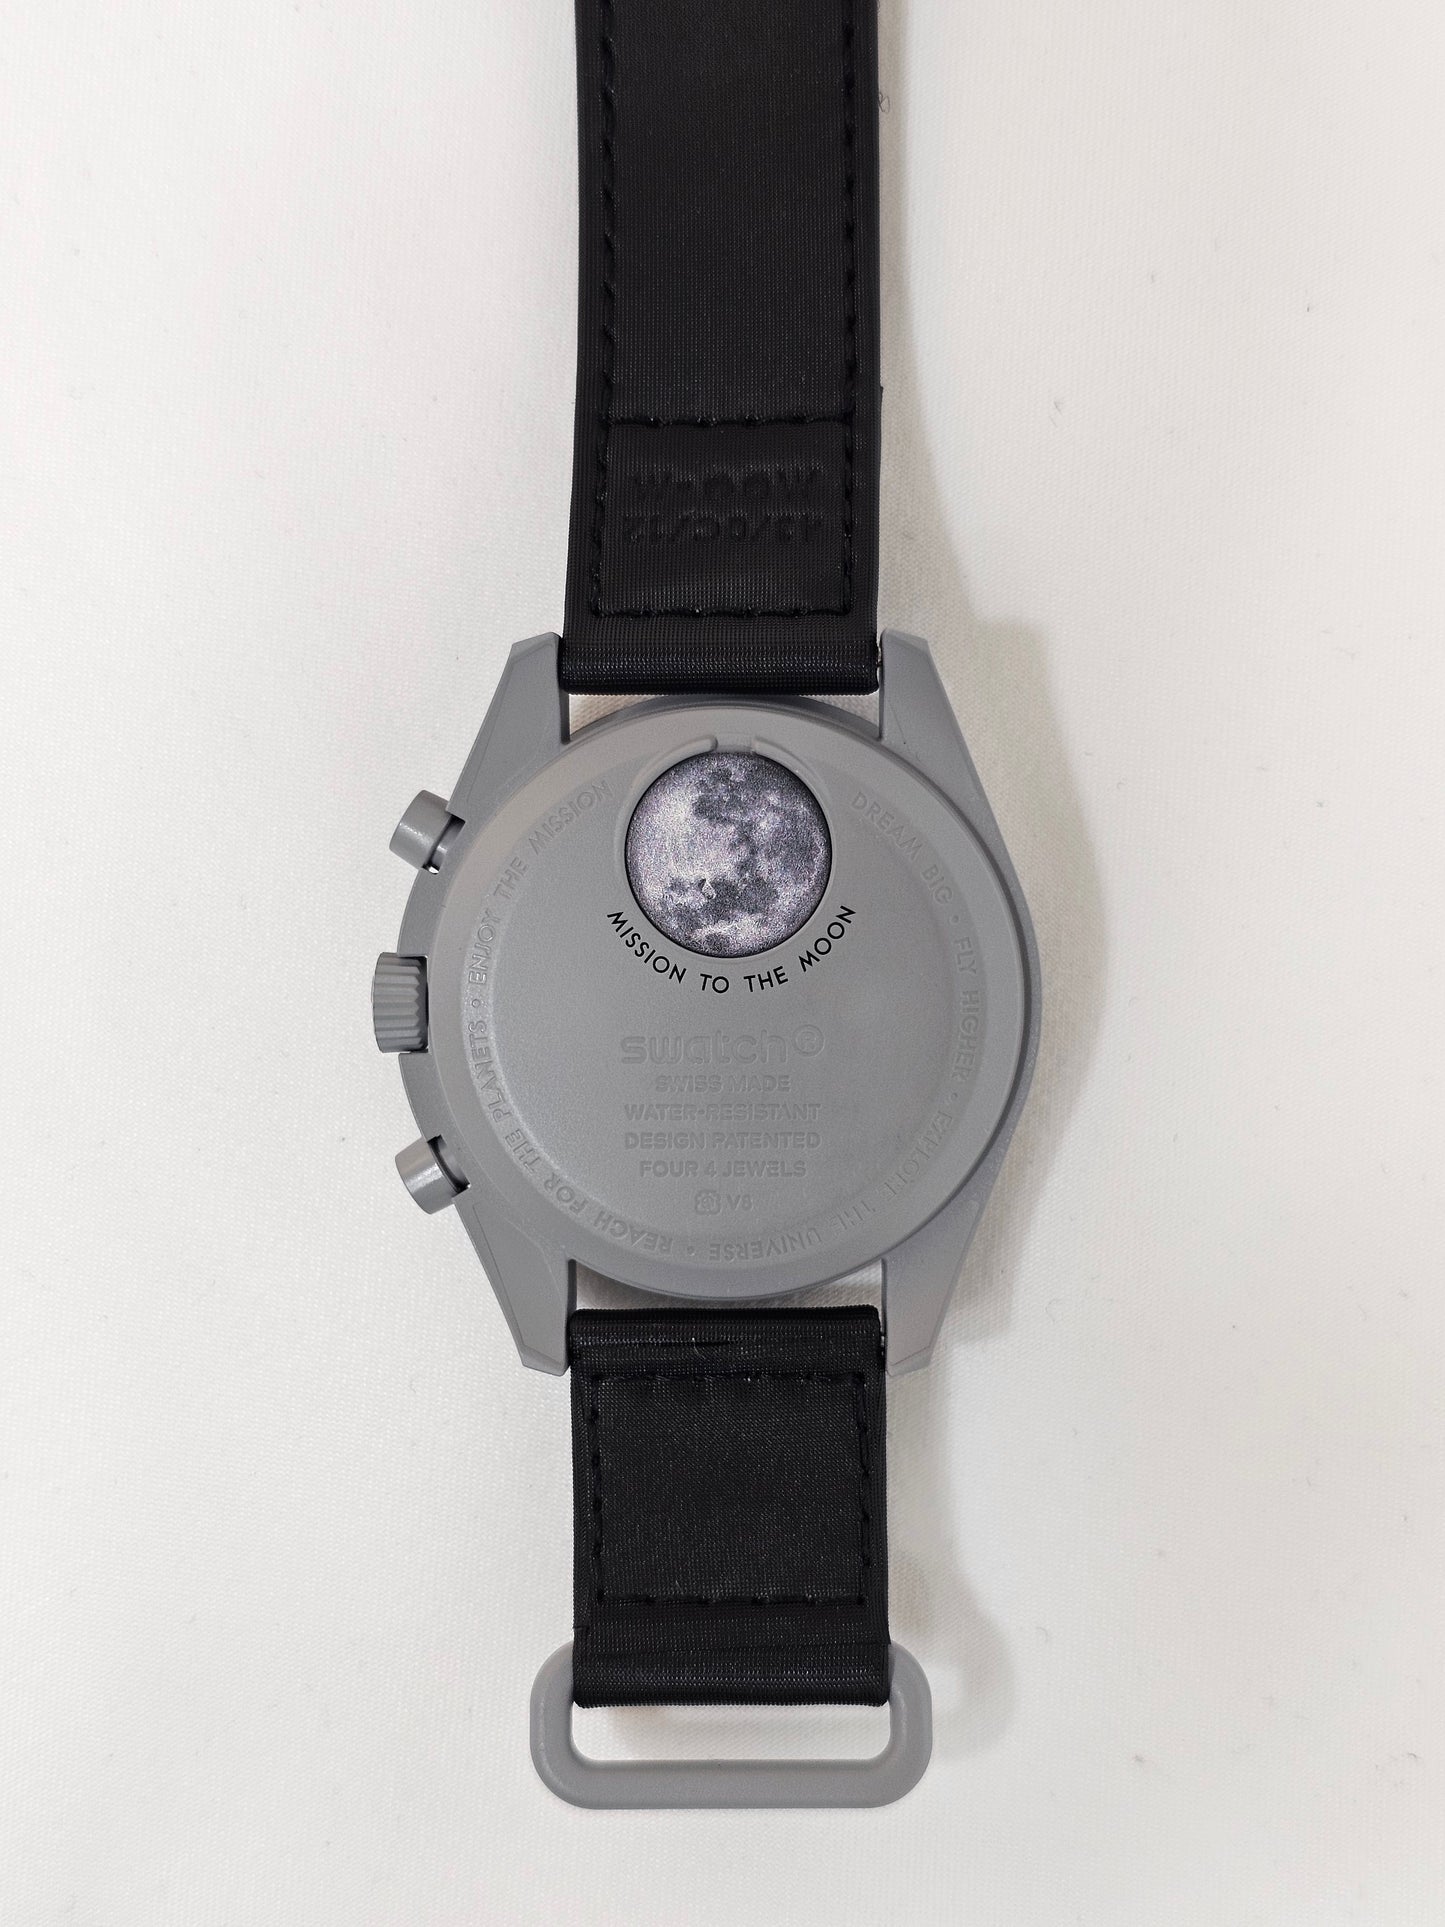 Swatch Moonswatch - Mission to the Moon: A Cosmic Voyage on Your Wrist